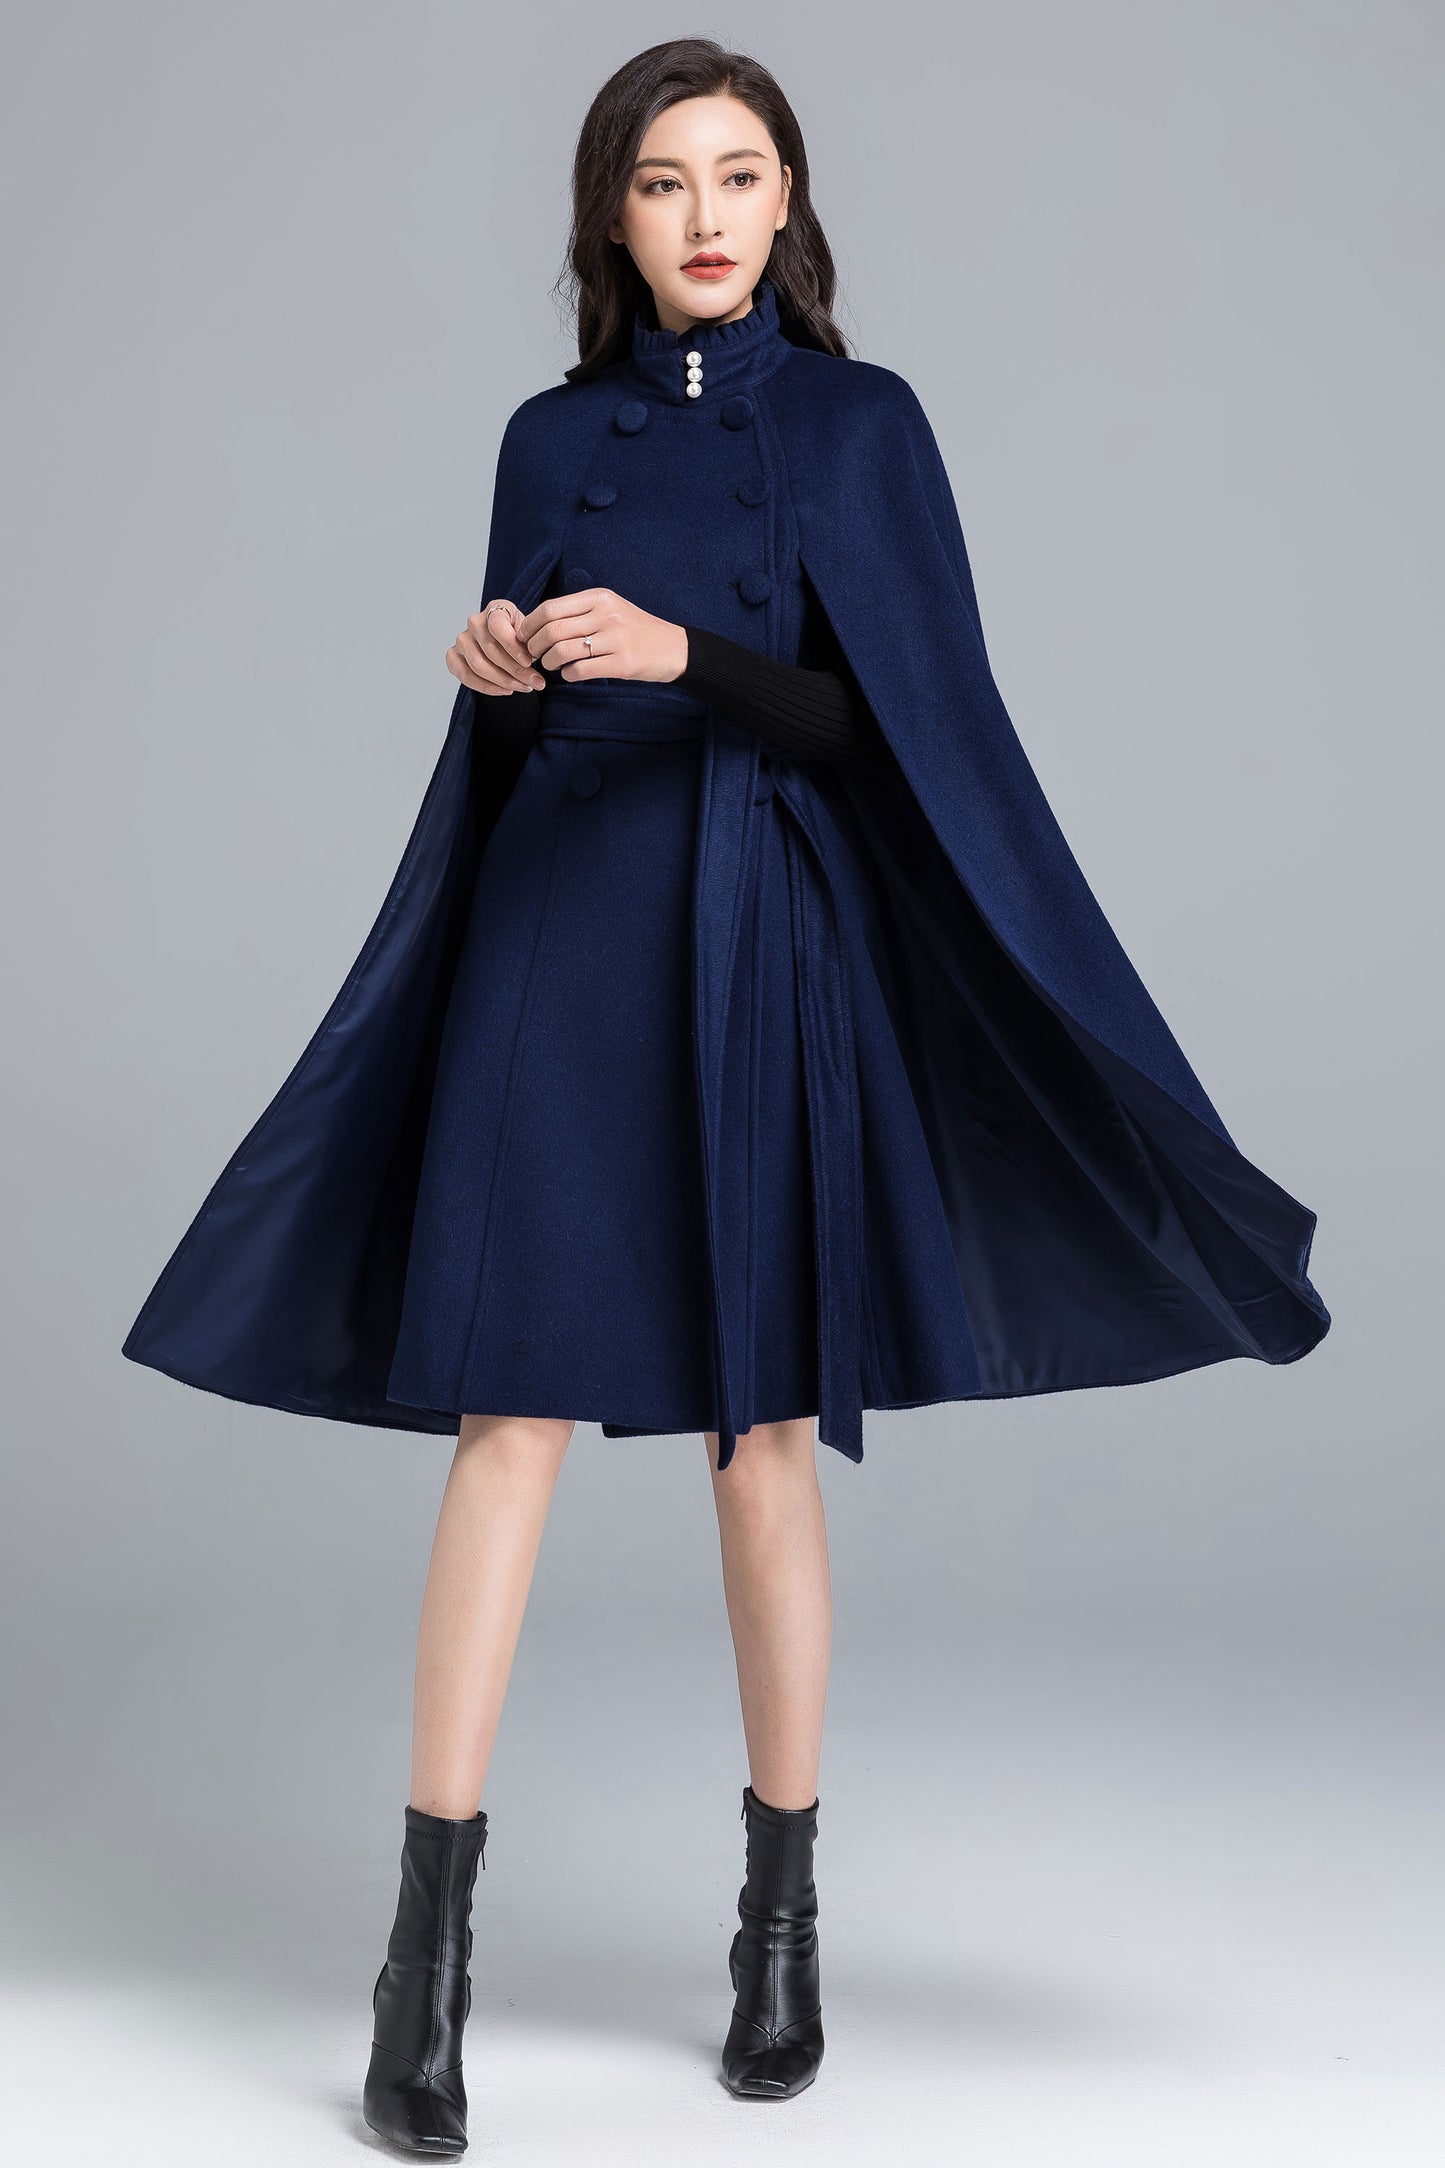 Winter Wool Cape Coat Women, Long Wool Cape with stand collar 2487